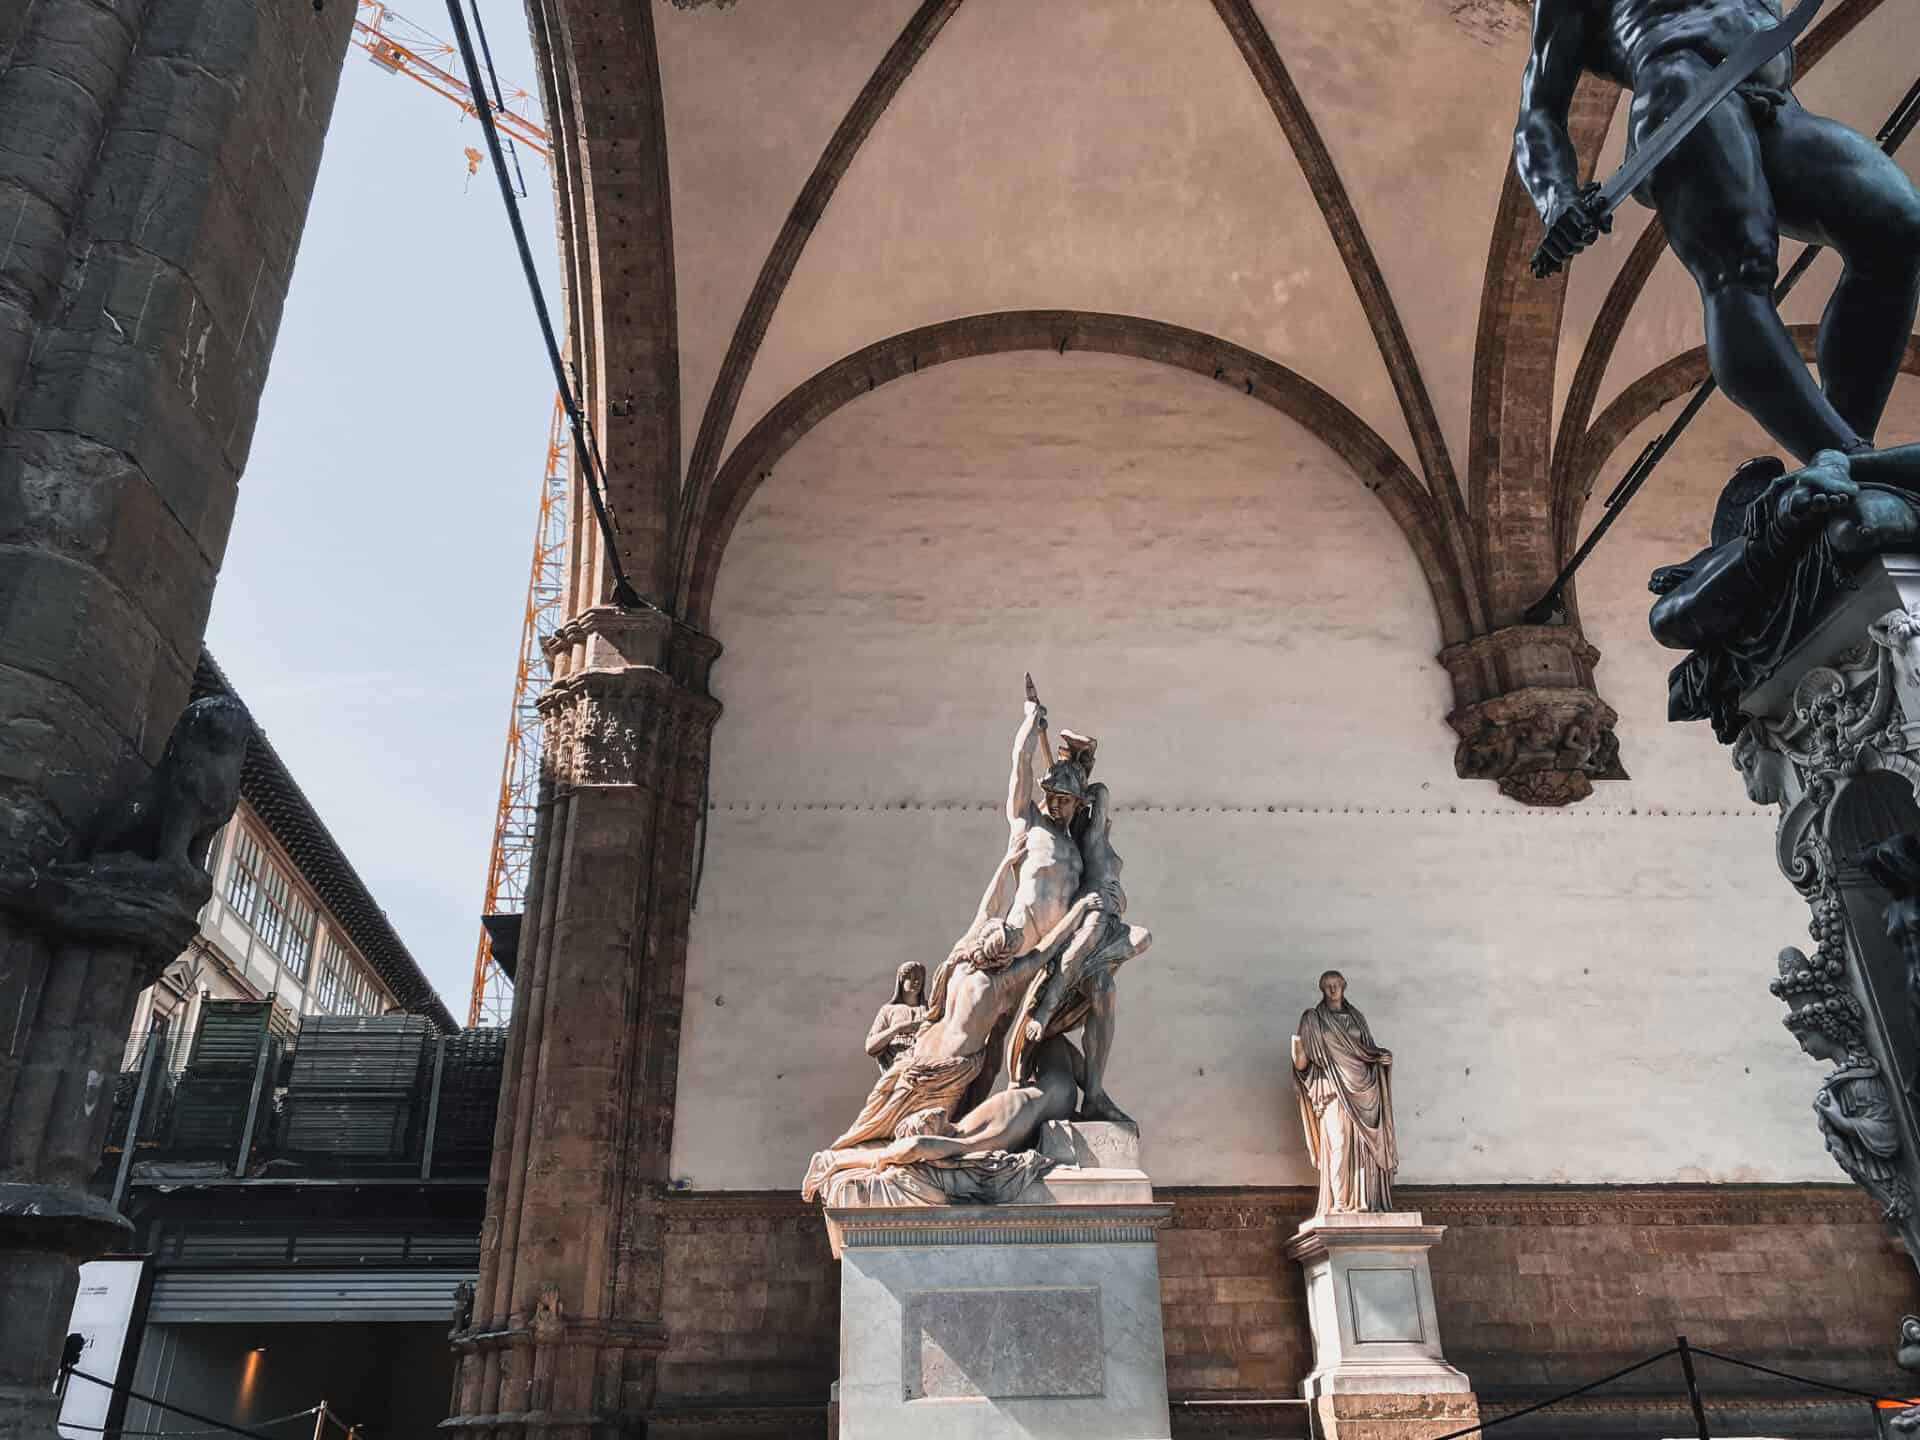 Statues of soldiers in the Piazza della signoria, florence Italy